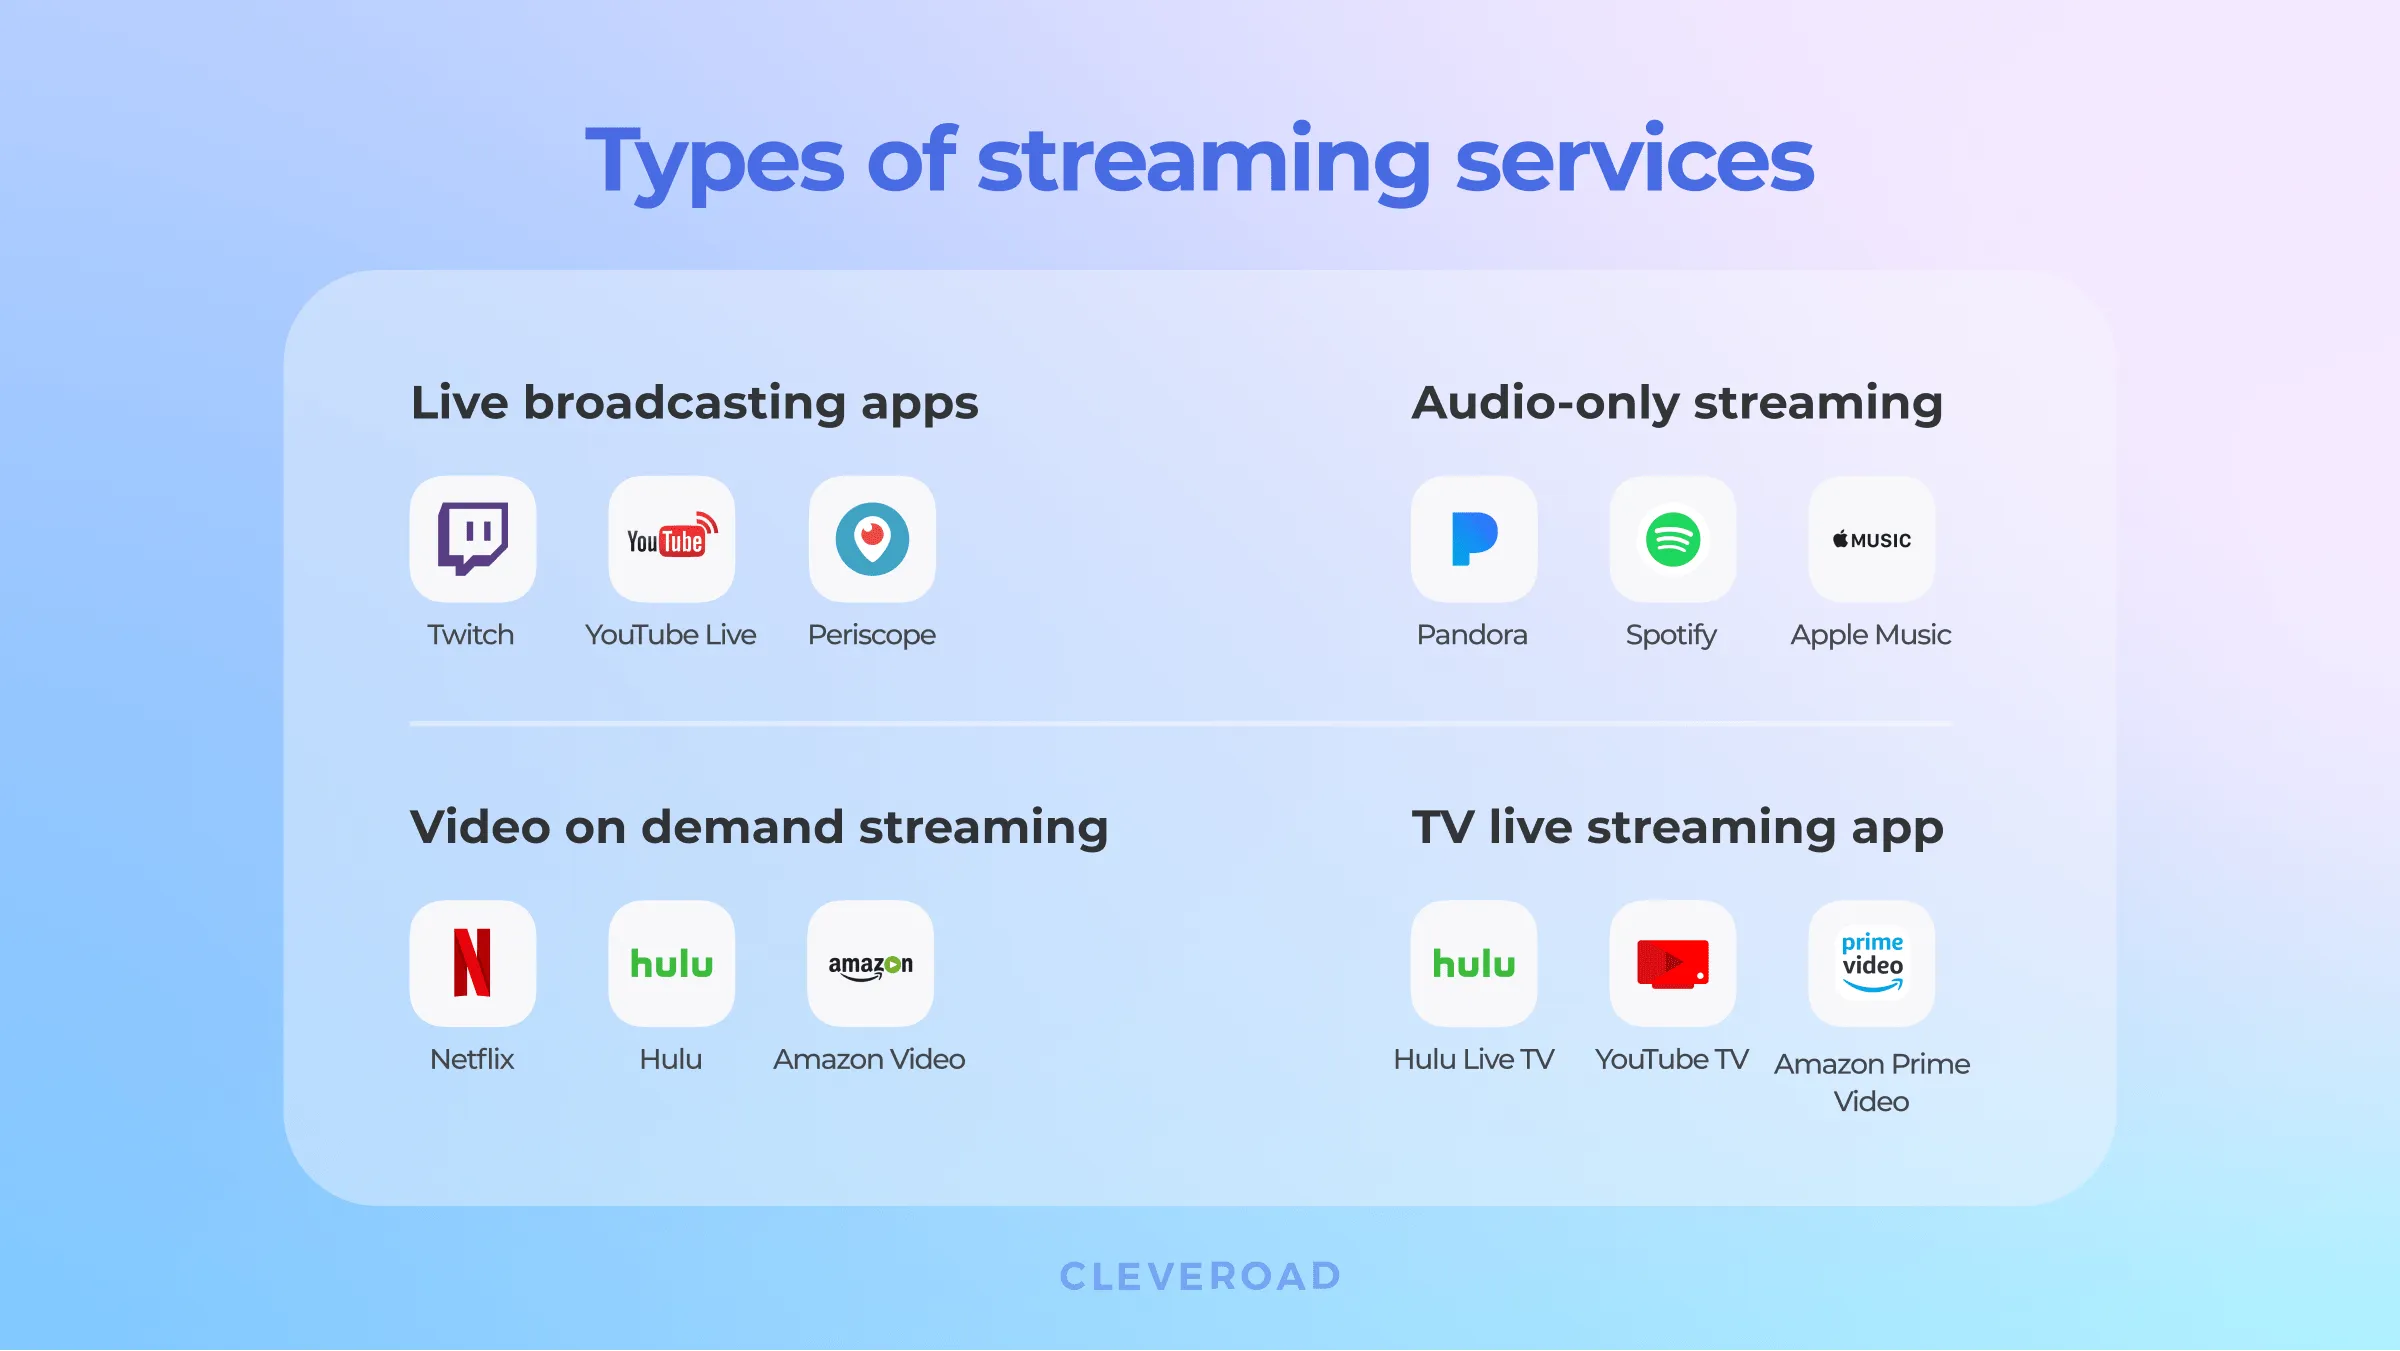 What types of streaming services exist?